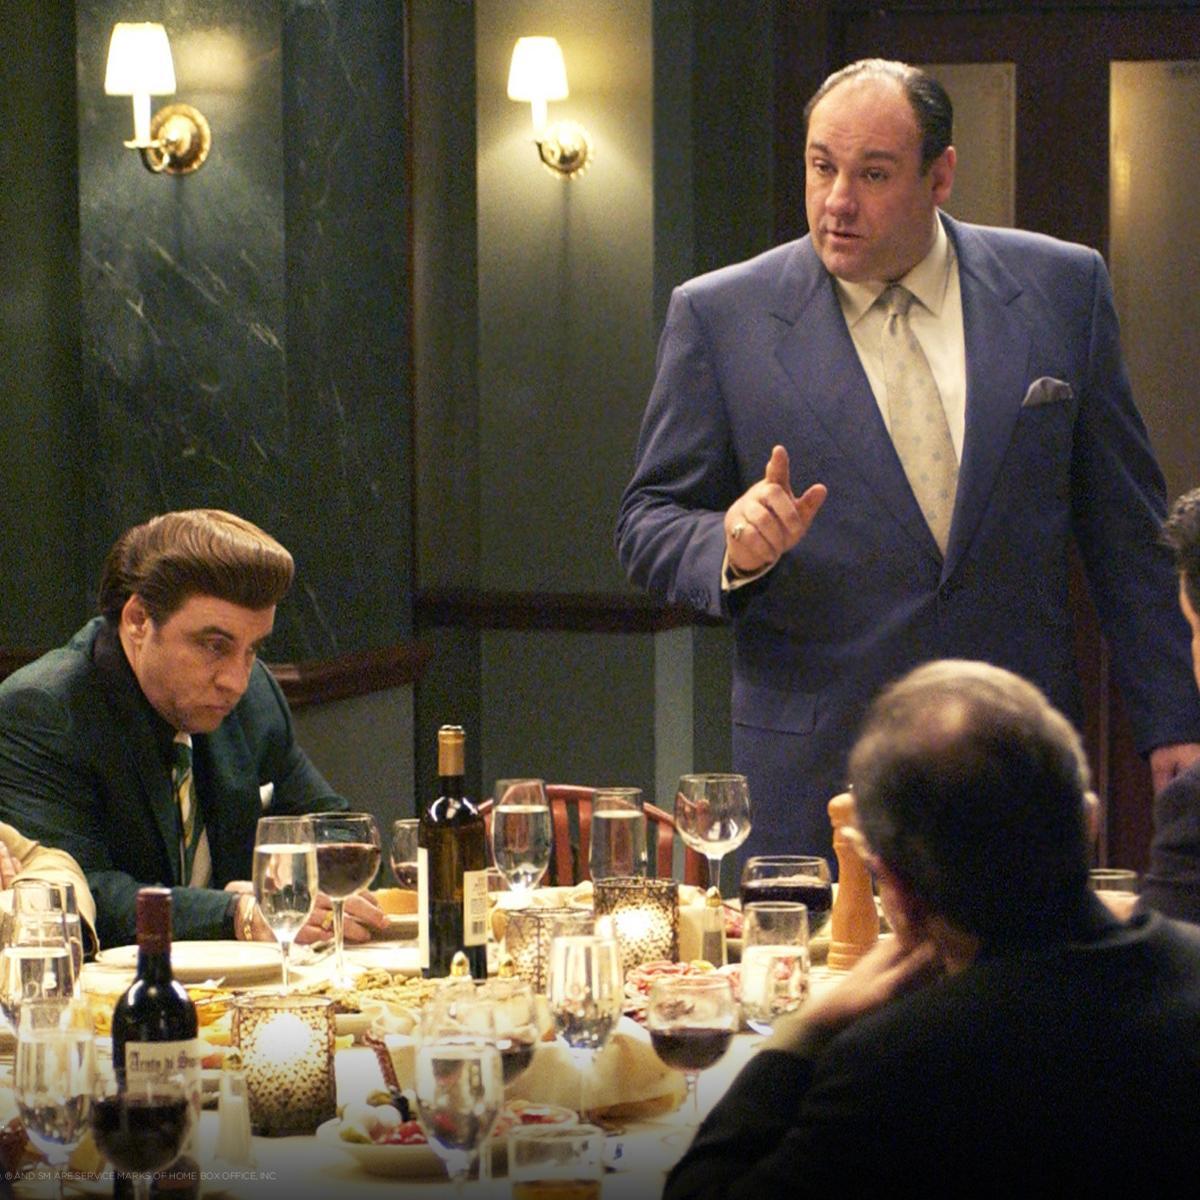 Quotes from the award winning HBO TV series masterpiece, The Sopranos.